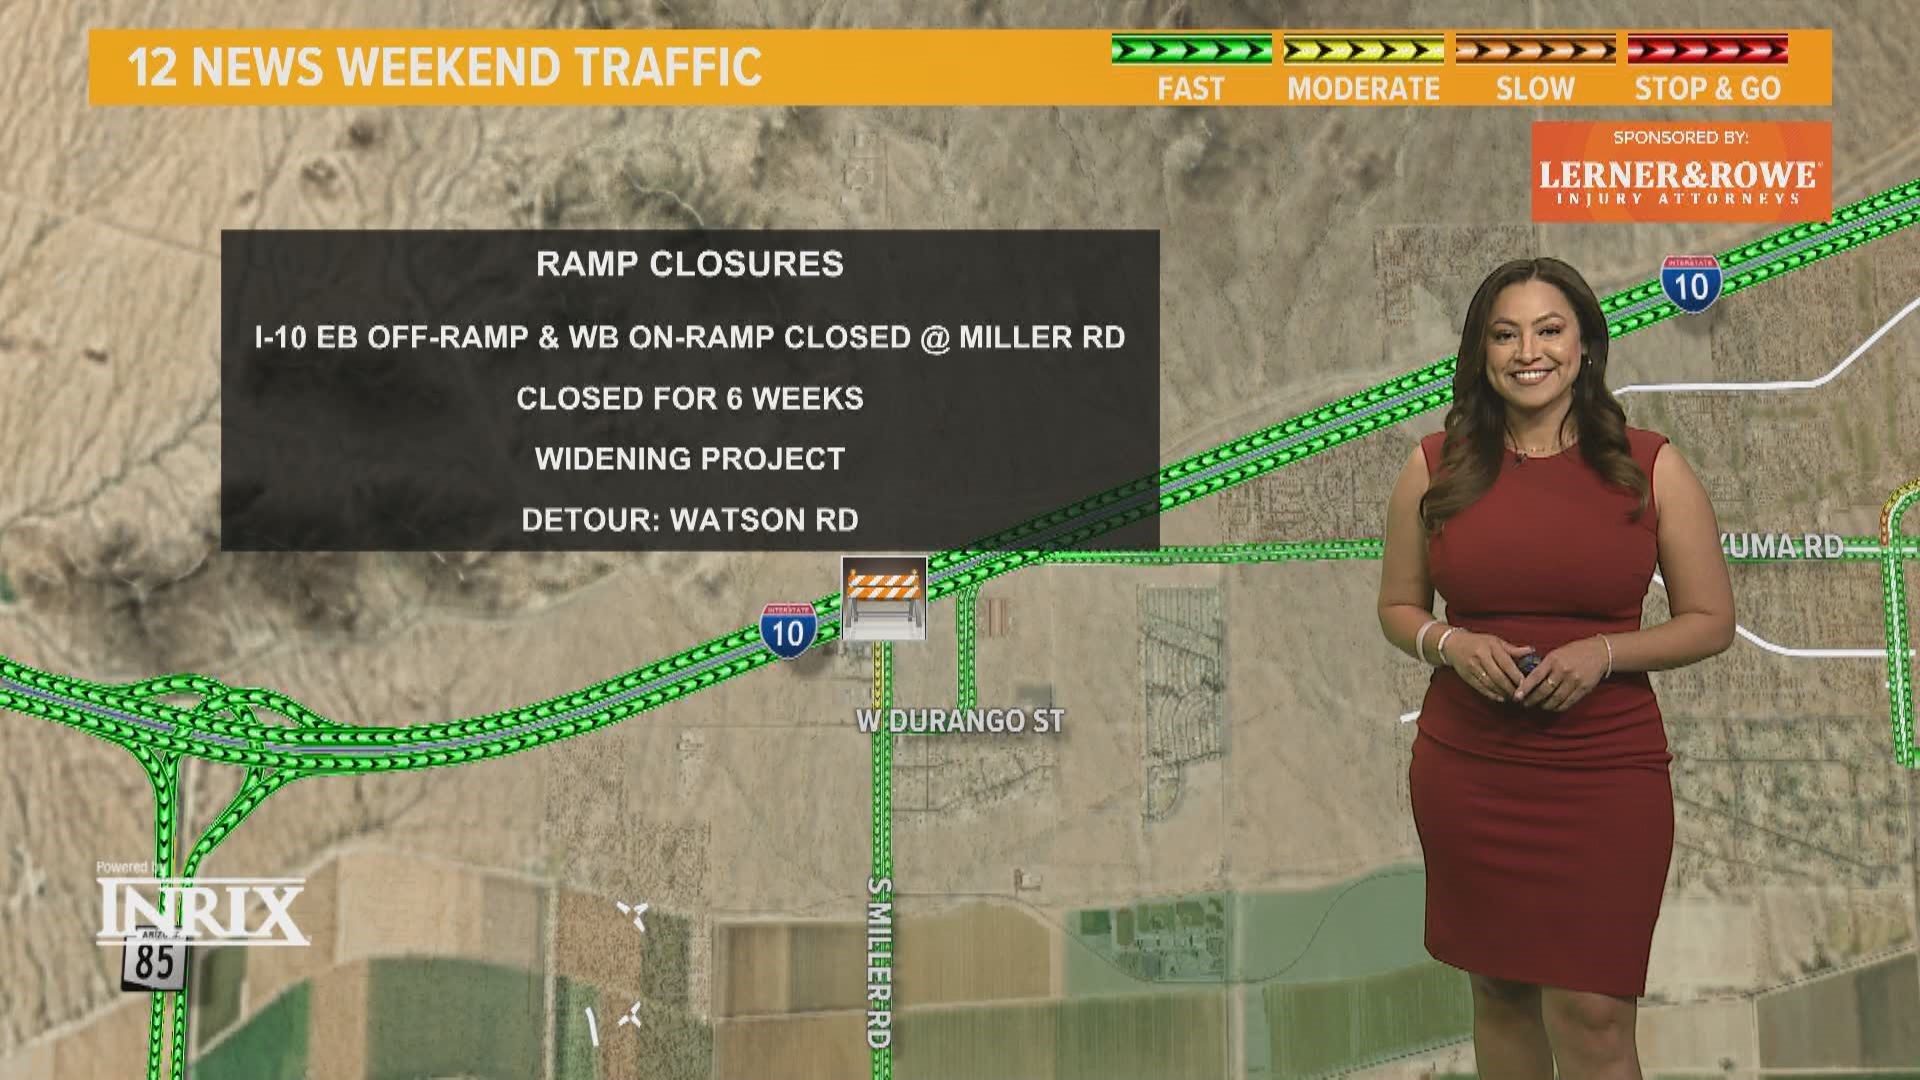 Vanessa Ramirez has the latest on the closures and detours on Valley roads for the weekend of March 18, 2022.